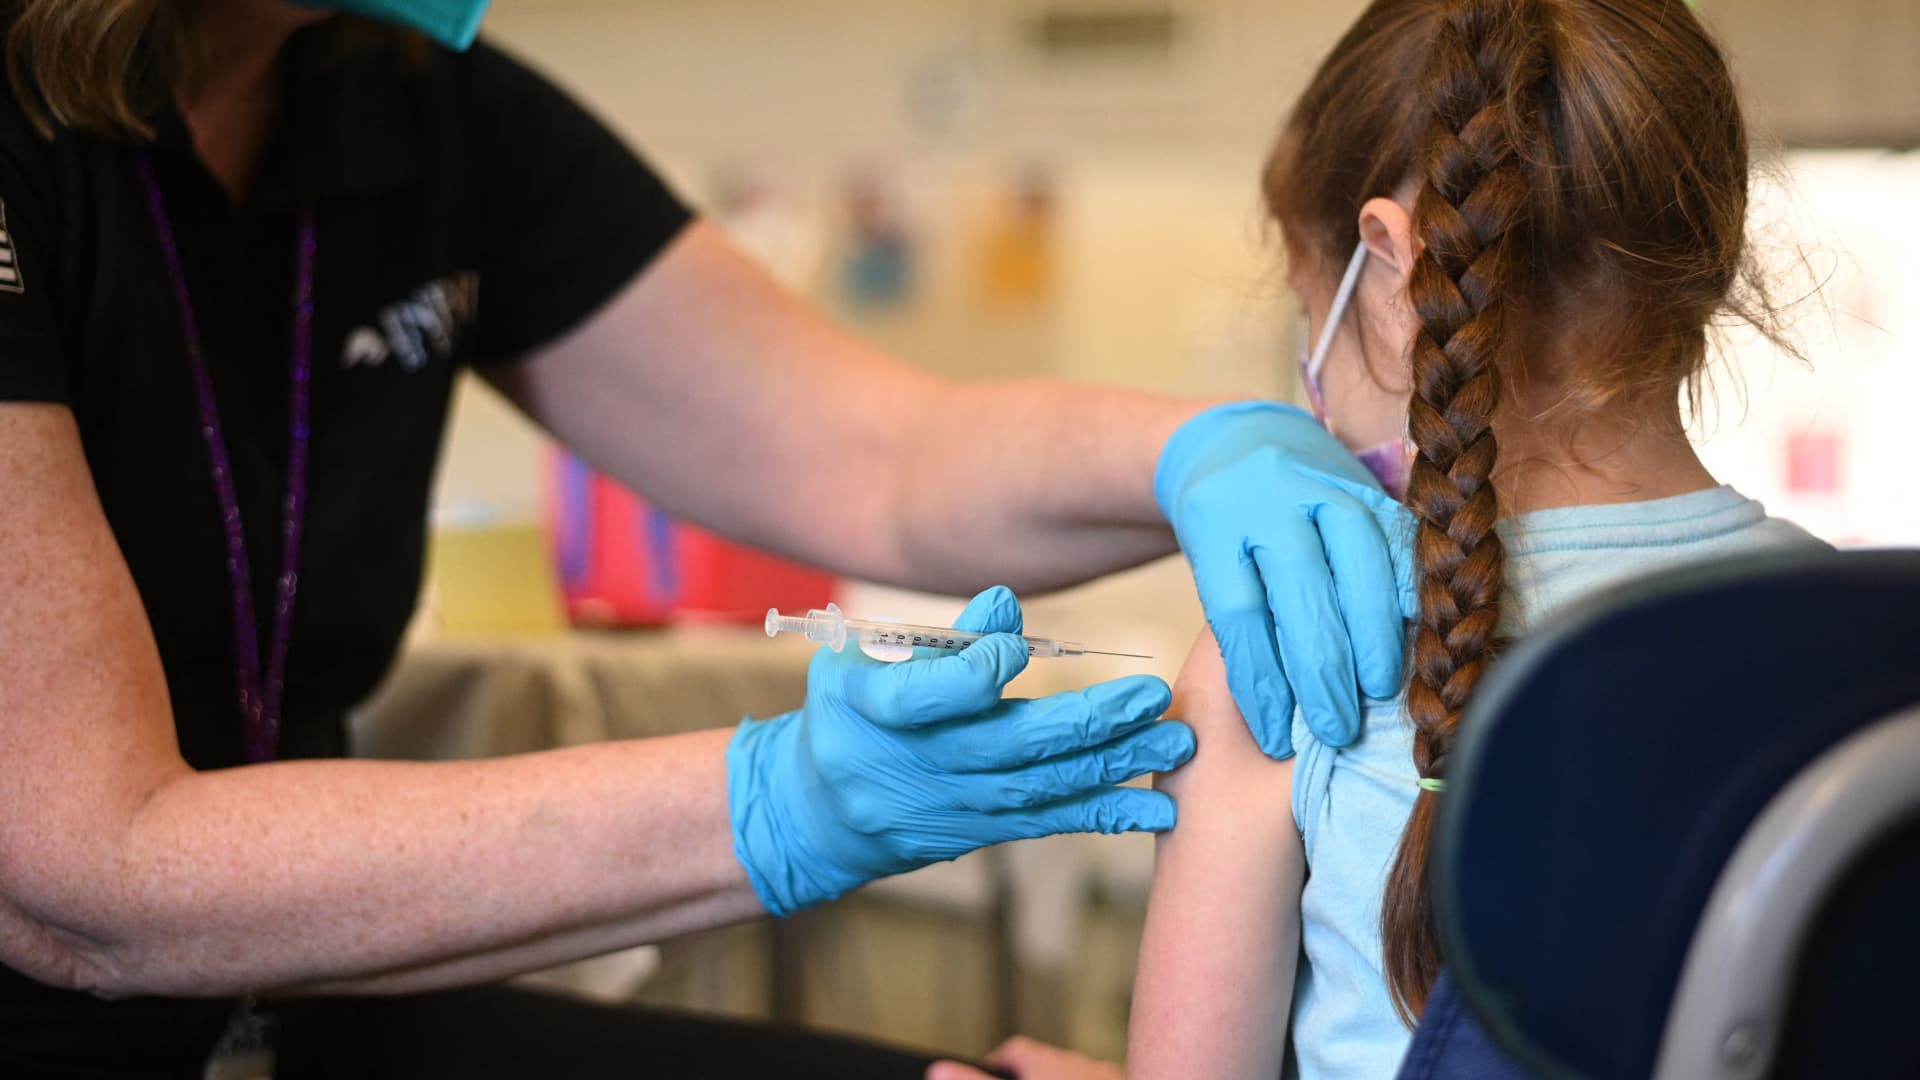 White House expects Covid vaccinations for children under age 5 to begin as early as June 21